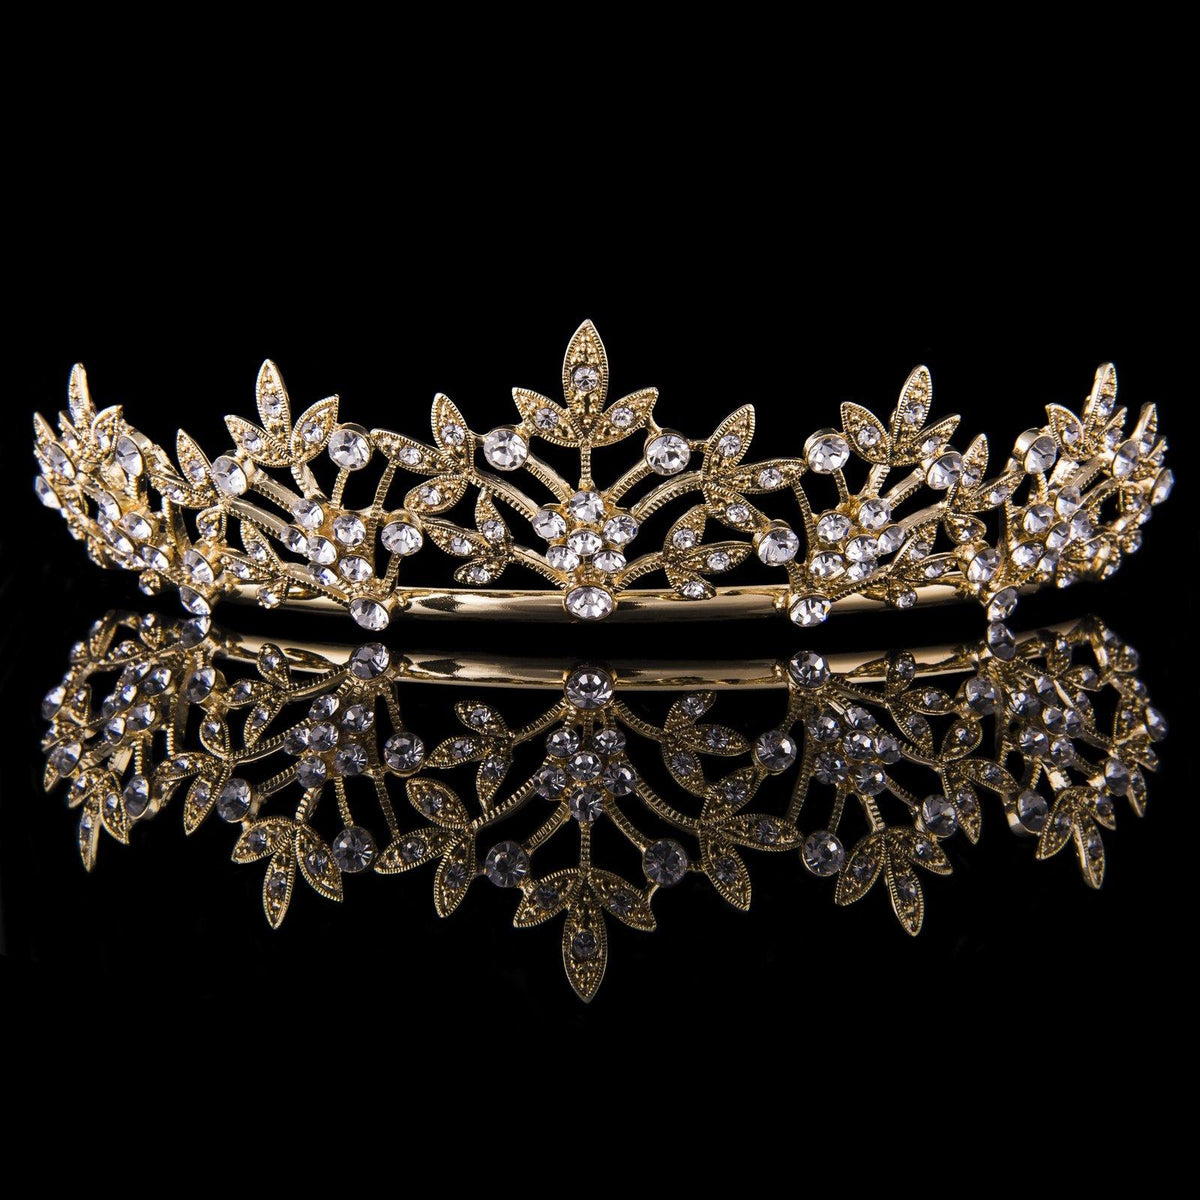 gold tiara gold with large crystals centred and smaller sparkling crystals at each end.